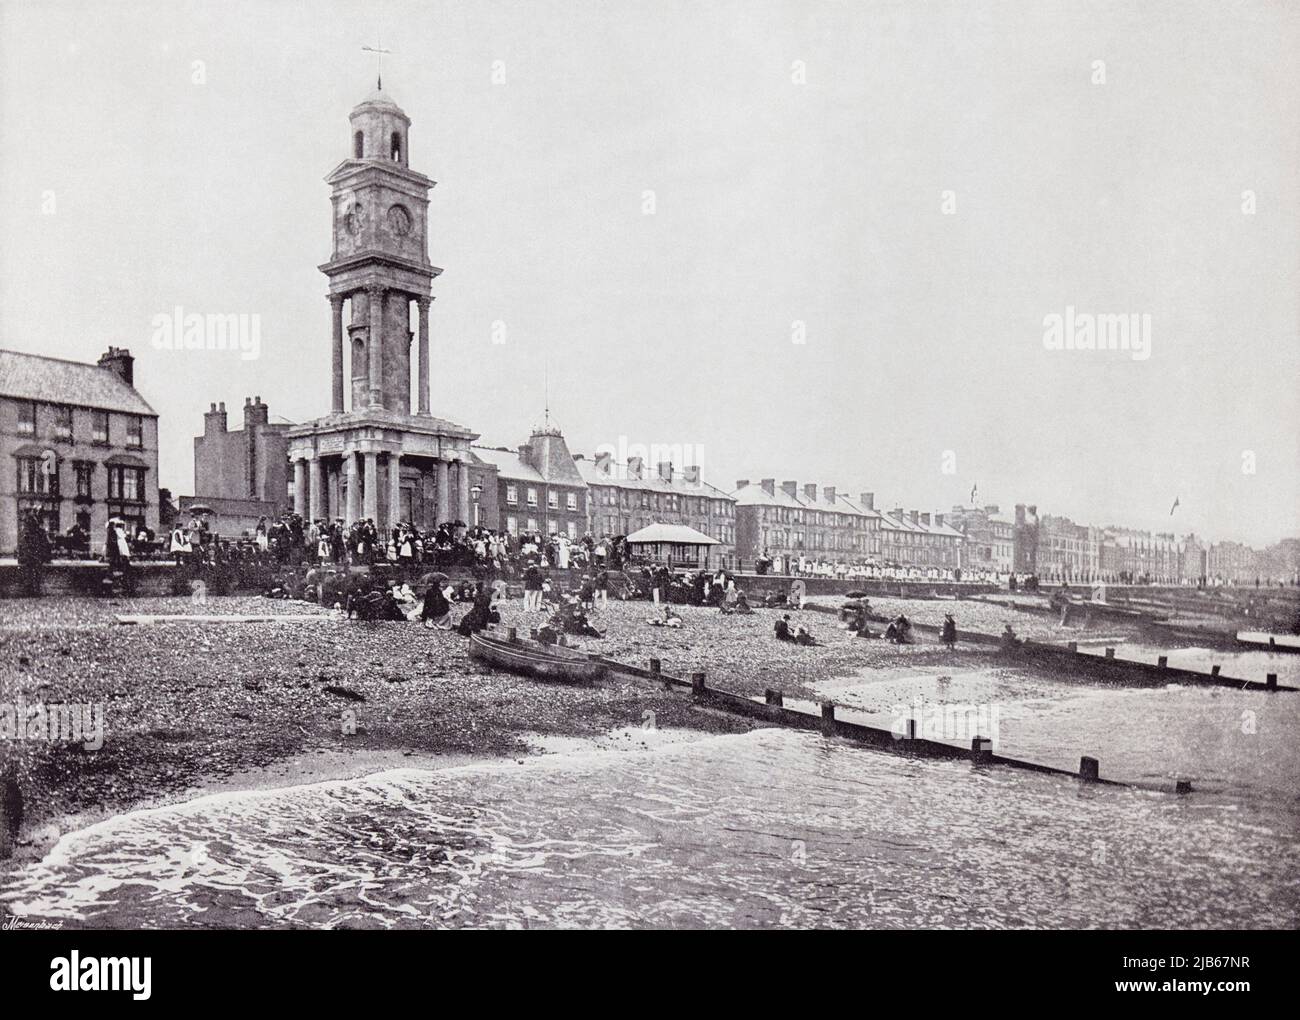 Herne Bay, Kent, England, showing the promenade and the clock tower in the 19th century. From Around The Coast, An Album of Pictures from Photographs Stock Photo